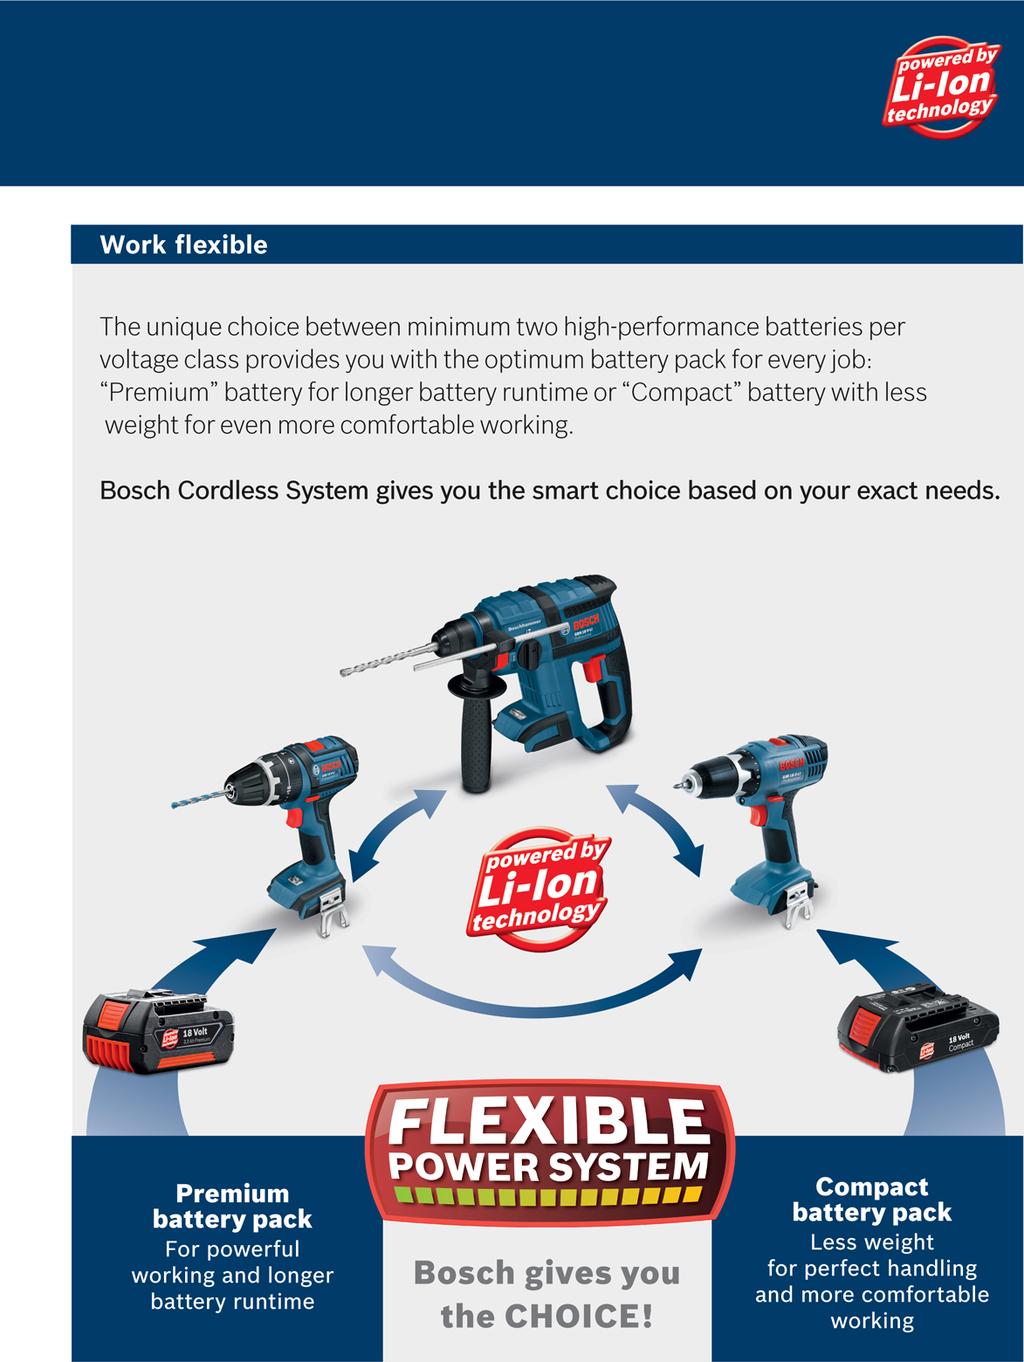 Professional Blue Power Tools for Trade &